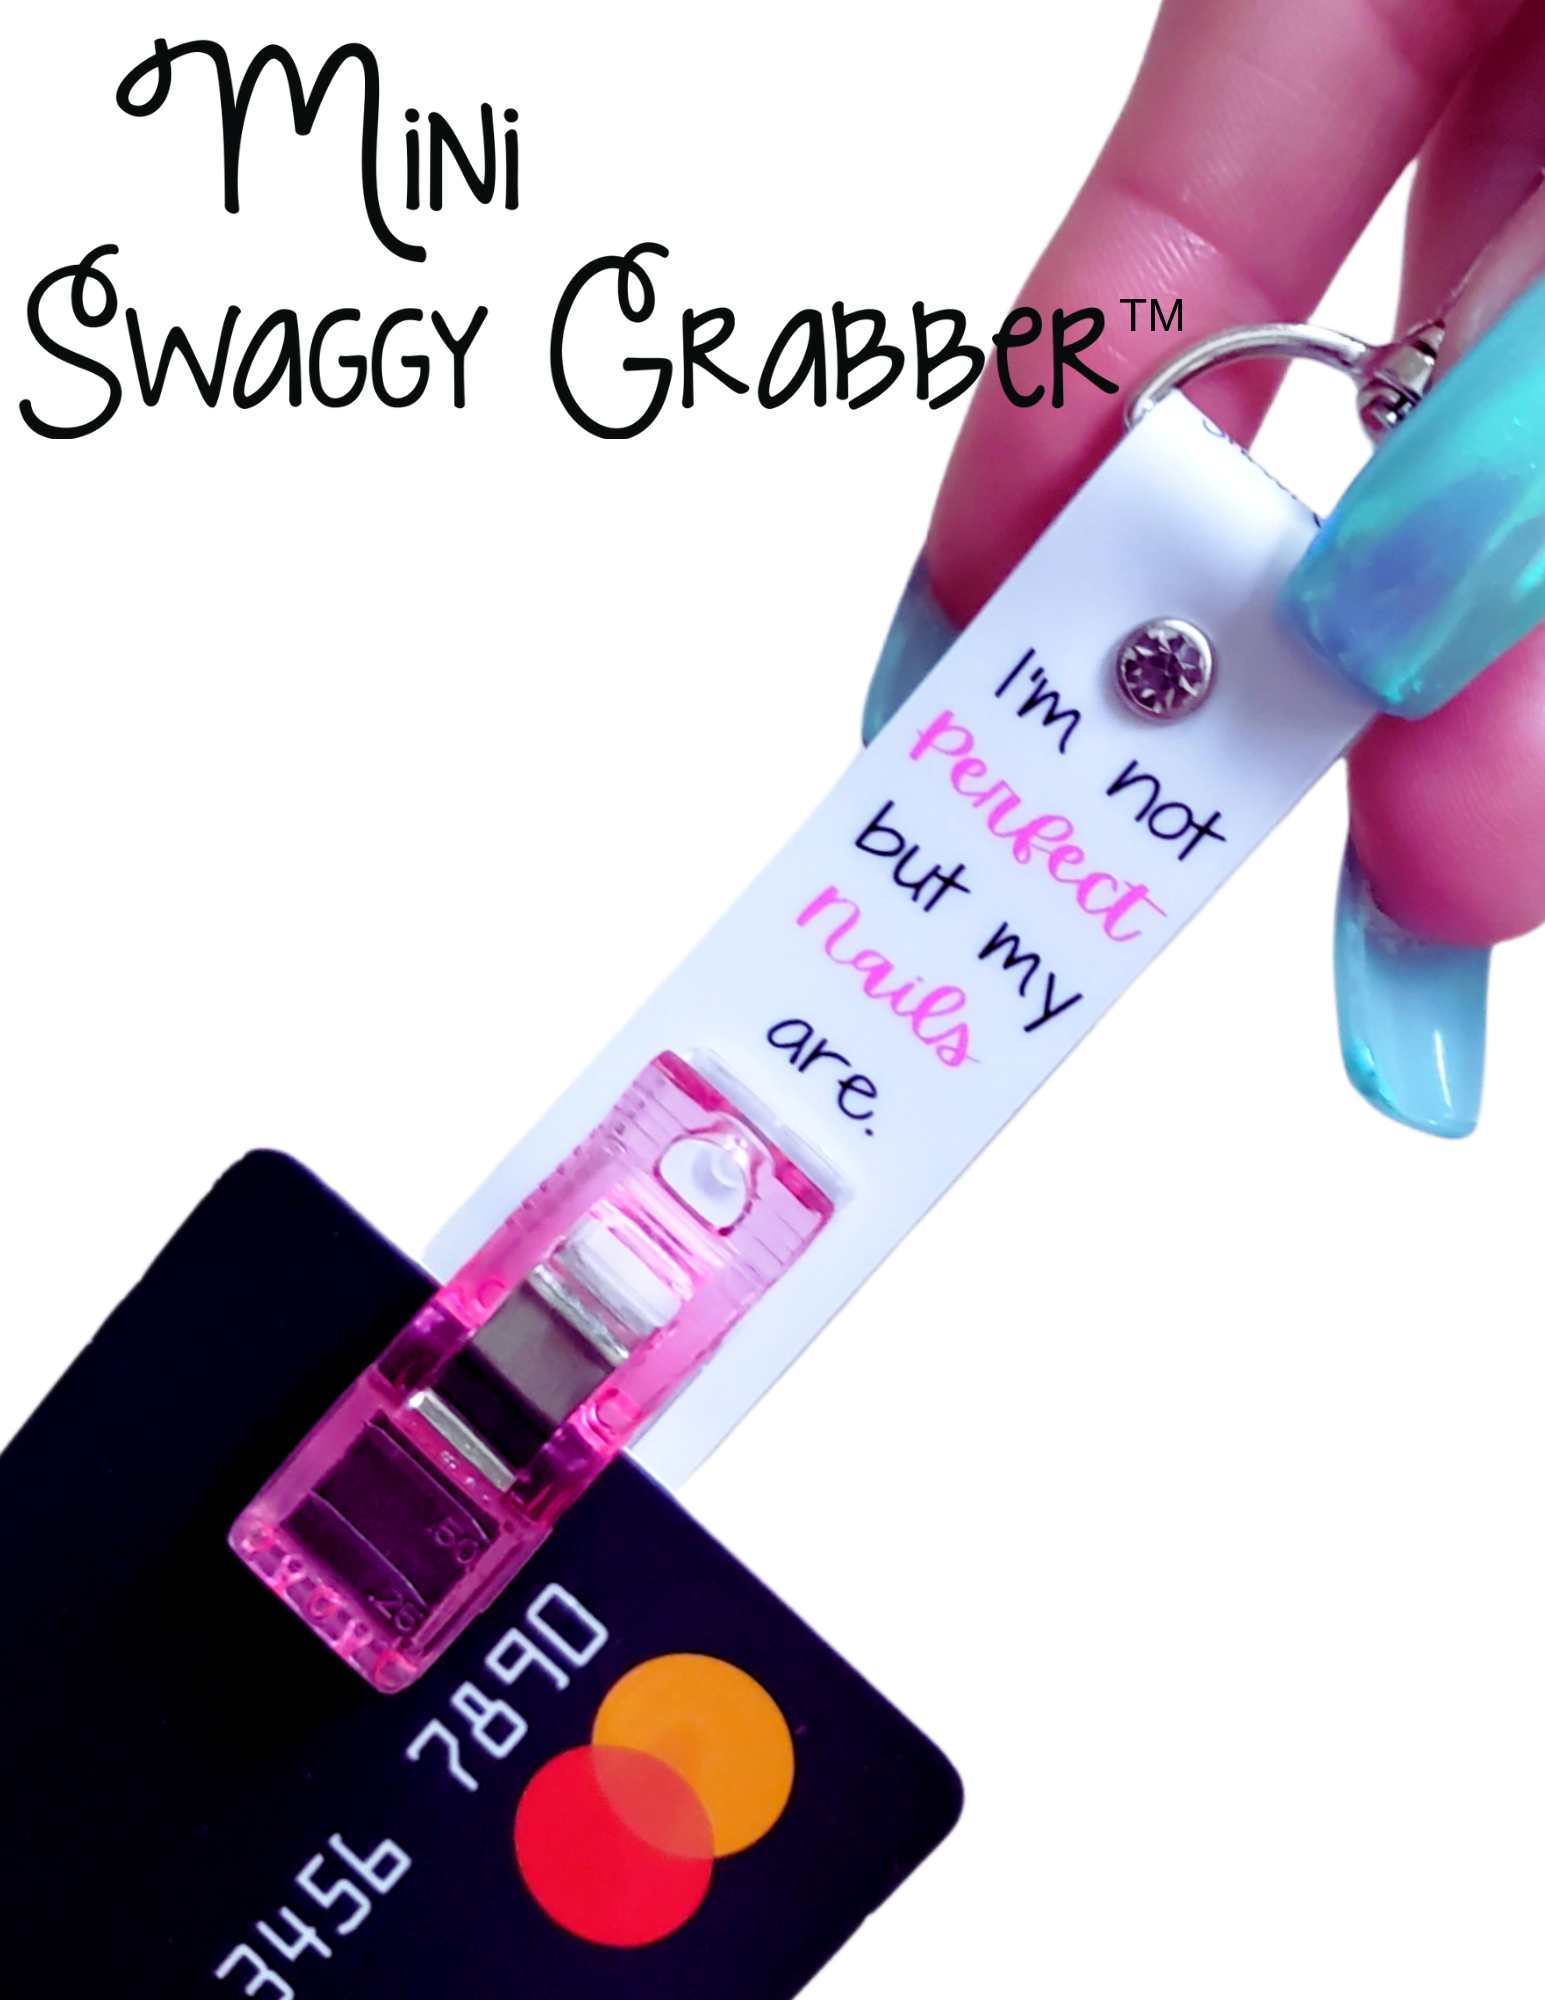 5-in-1 Jewelry Helper Tool & Original Card Grabber The Mini Swaggy Grabber The Perfect Nails